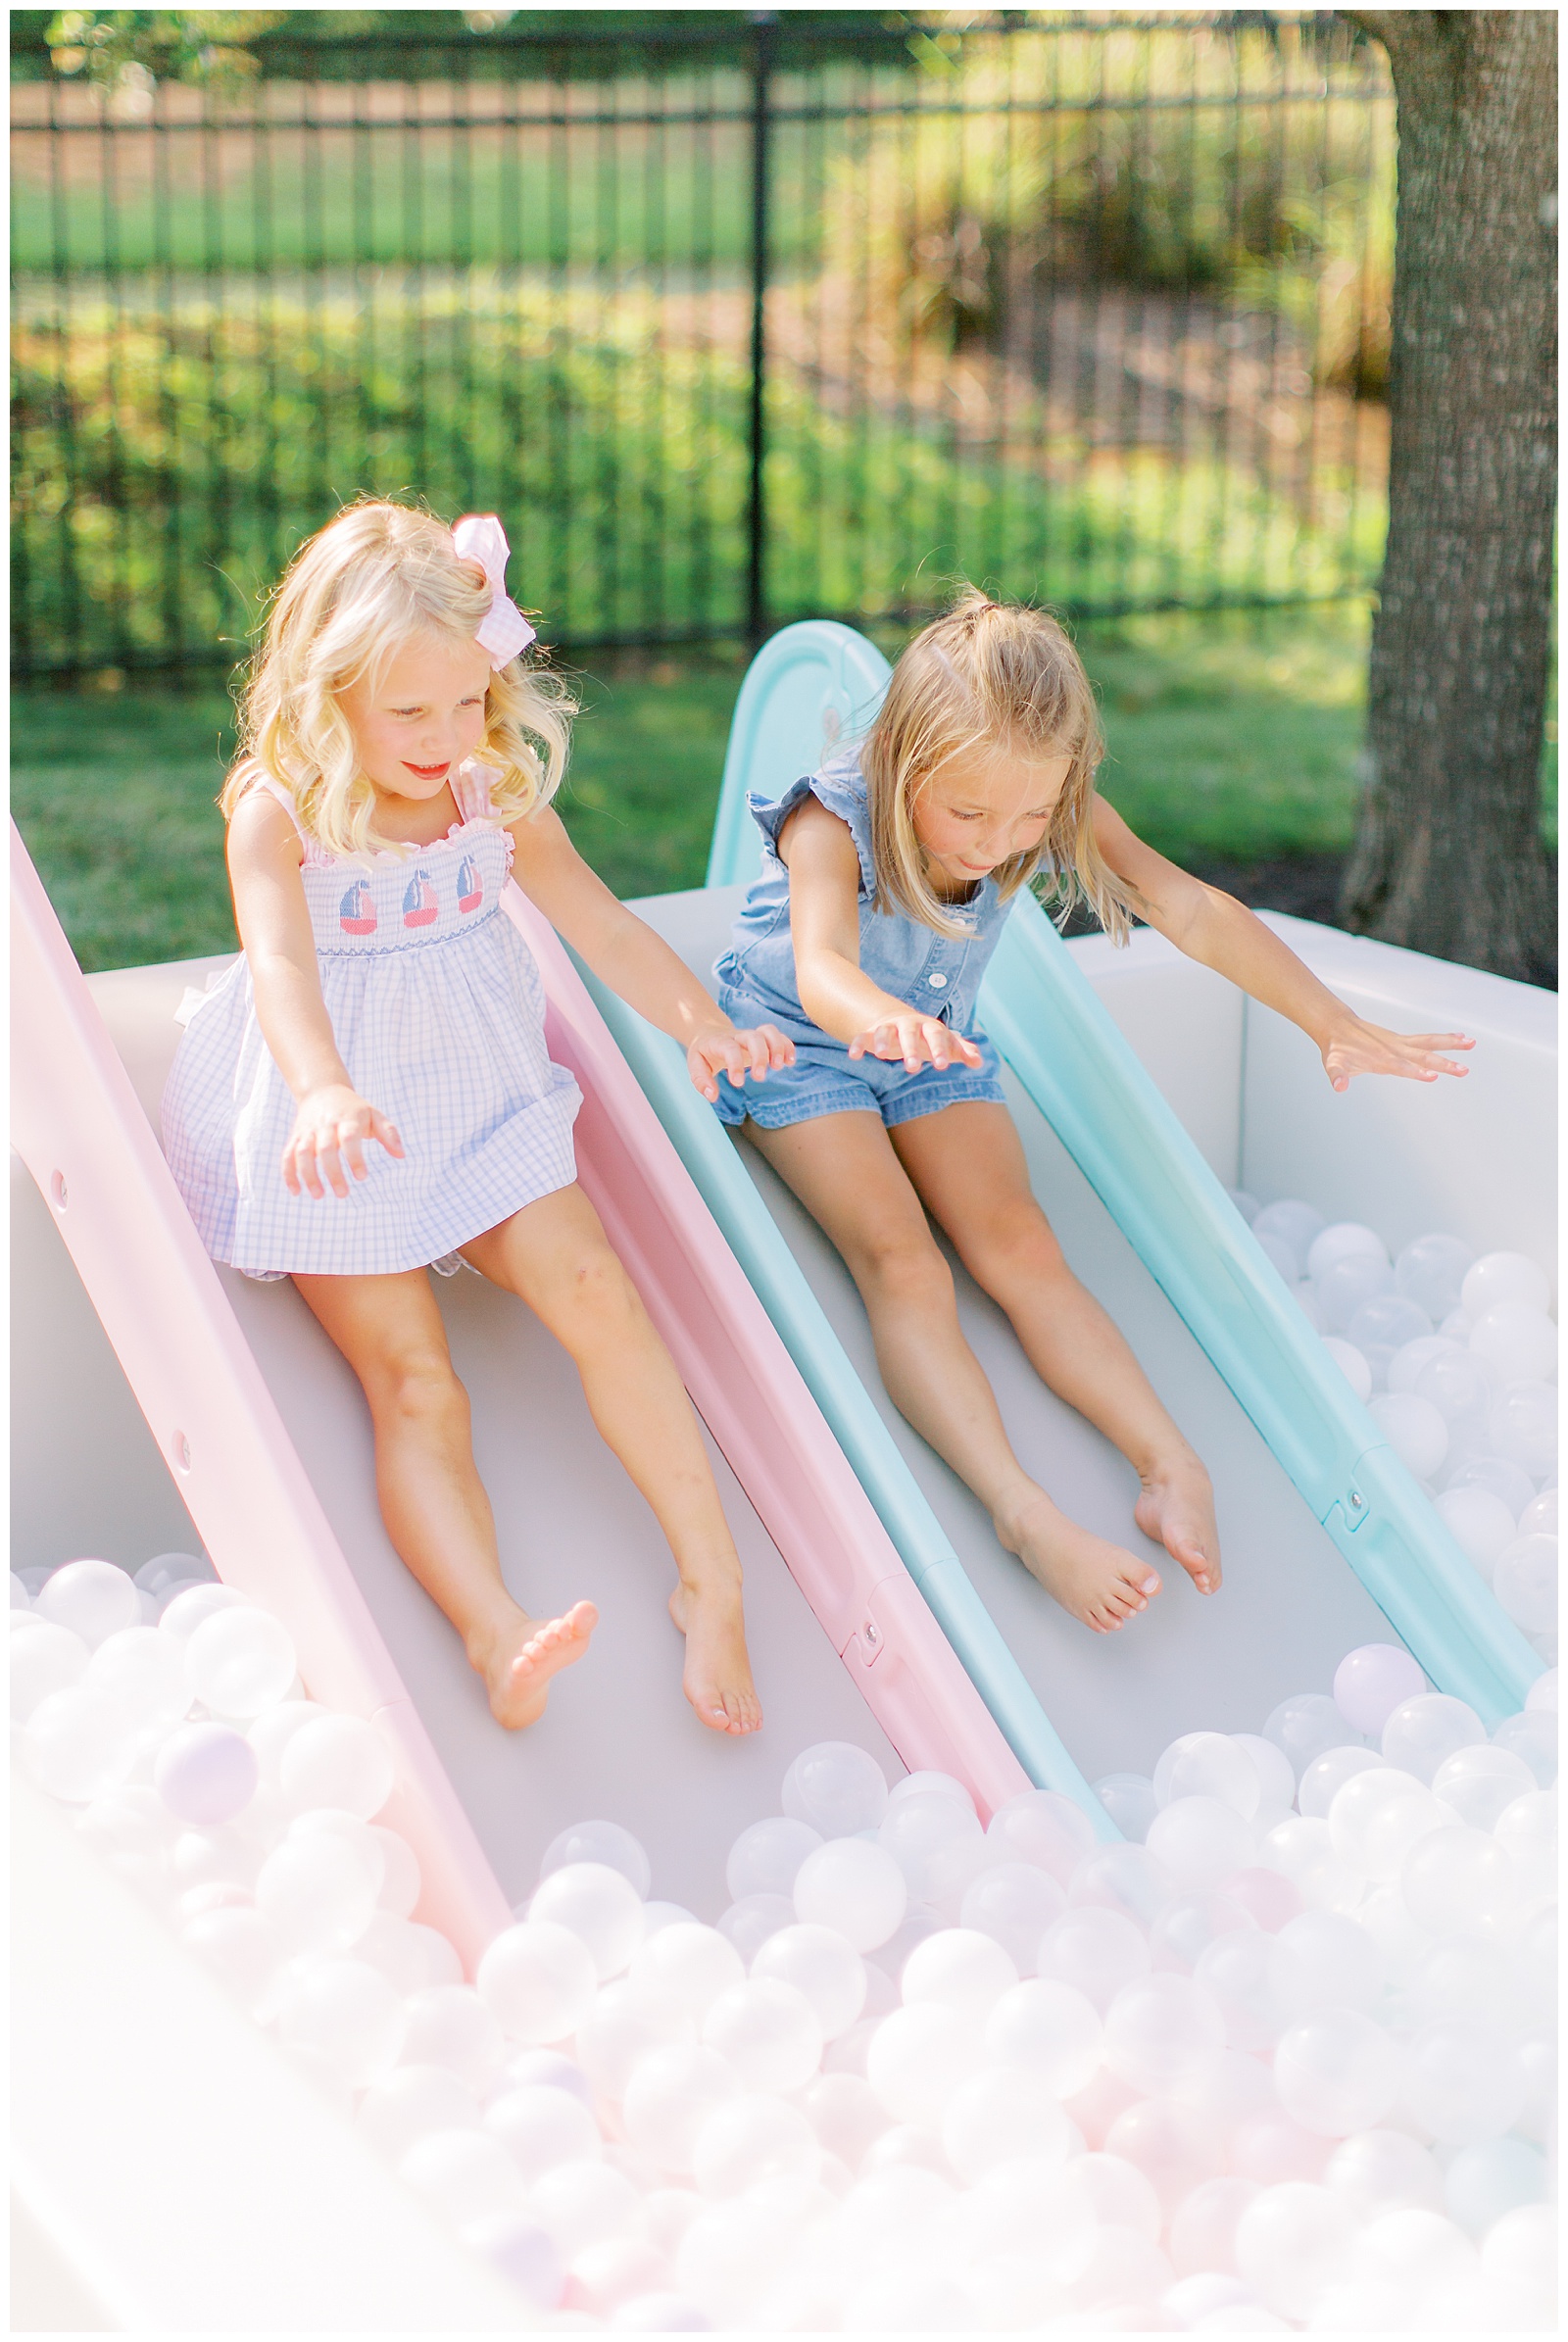 girls enjoying the slides and ball pit at a kids birthday party in Charlotte, NC